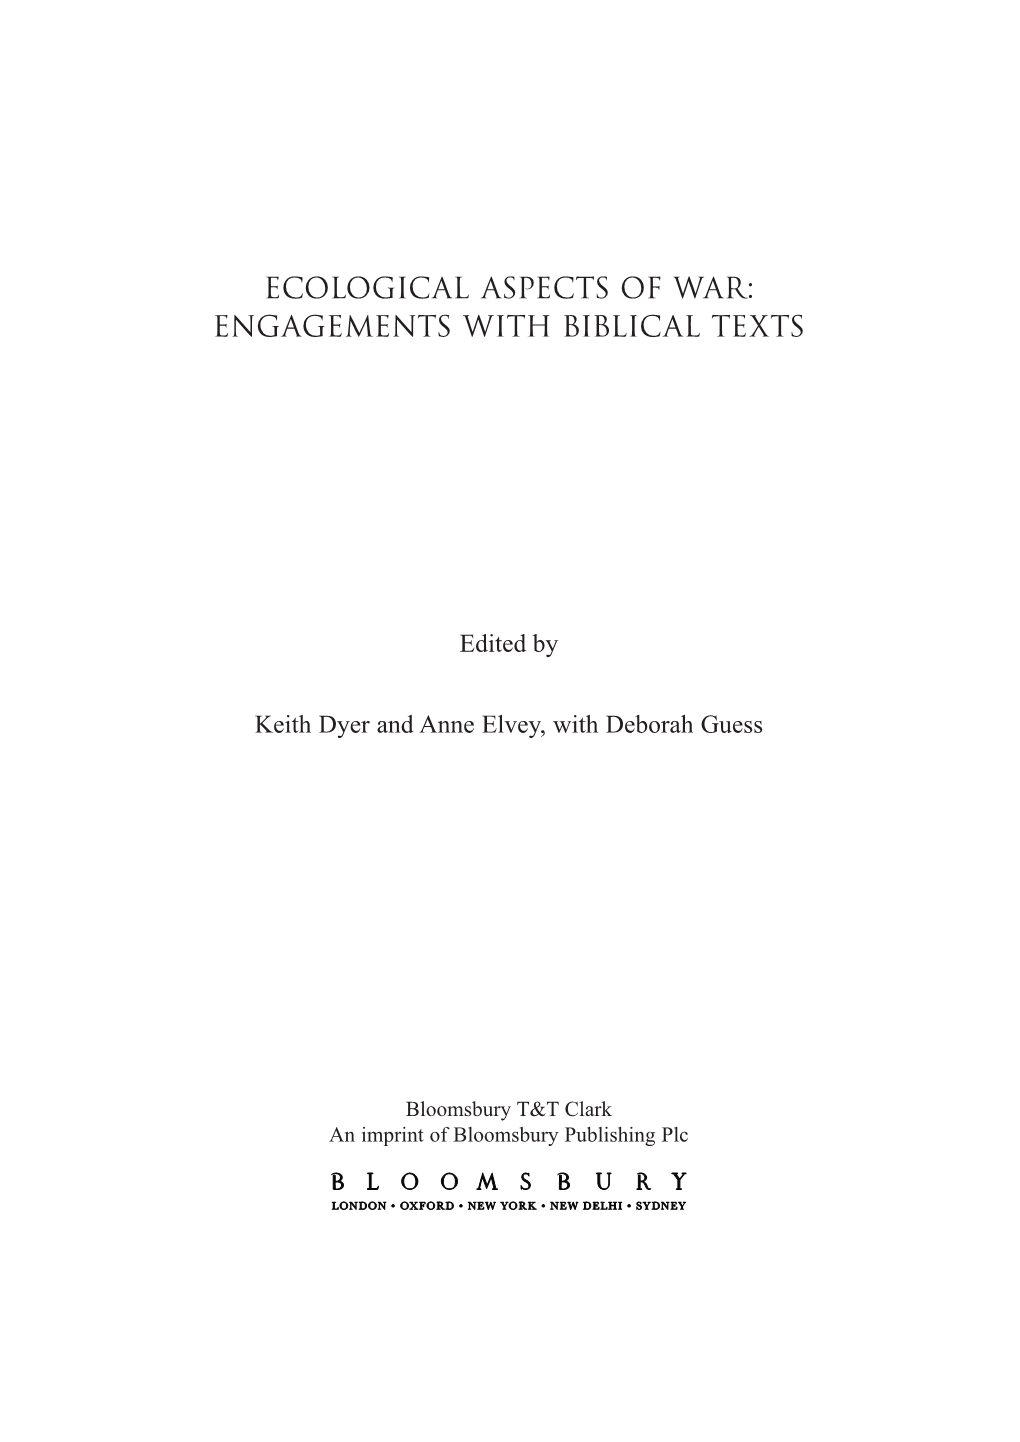 Ecological Aspects of War: Engagements with Biblical Texts